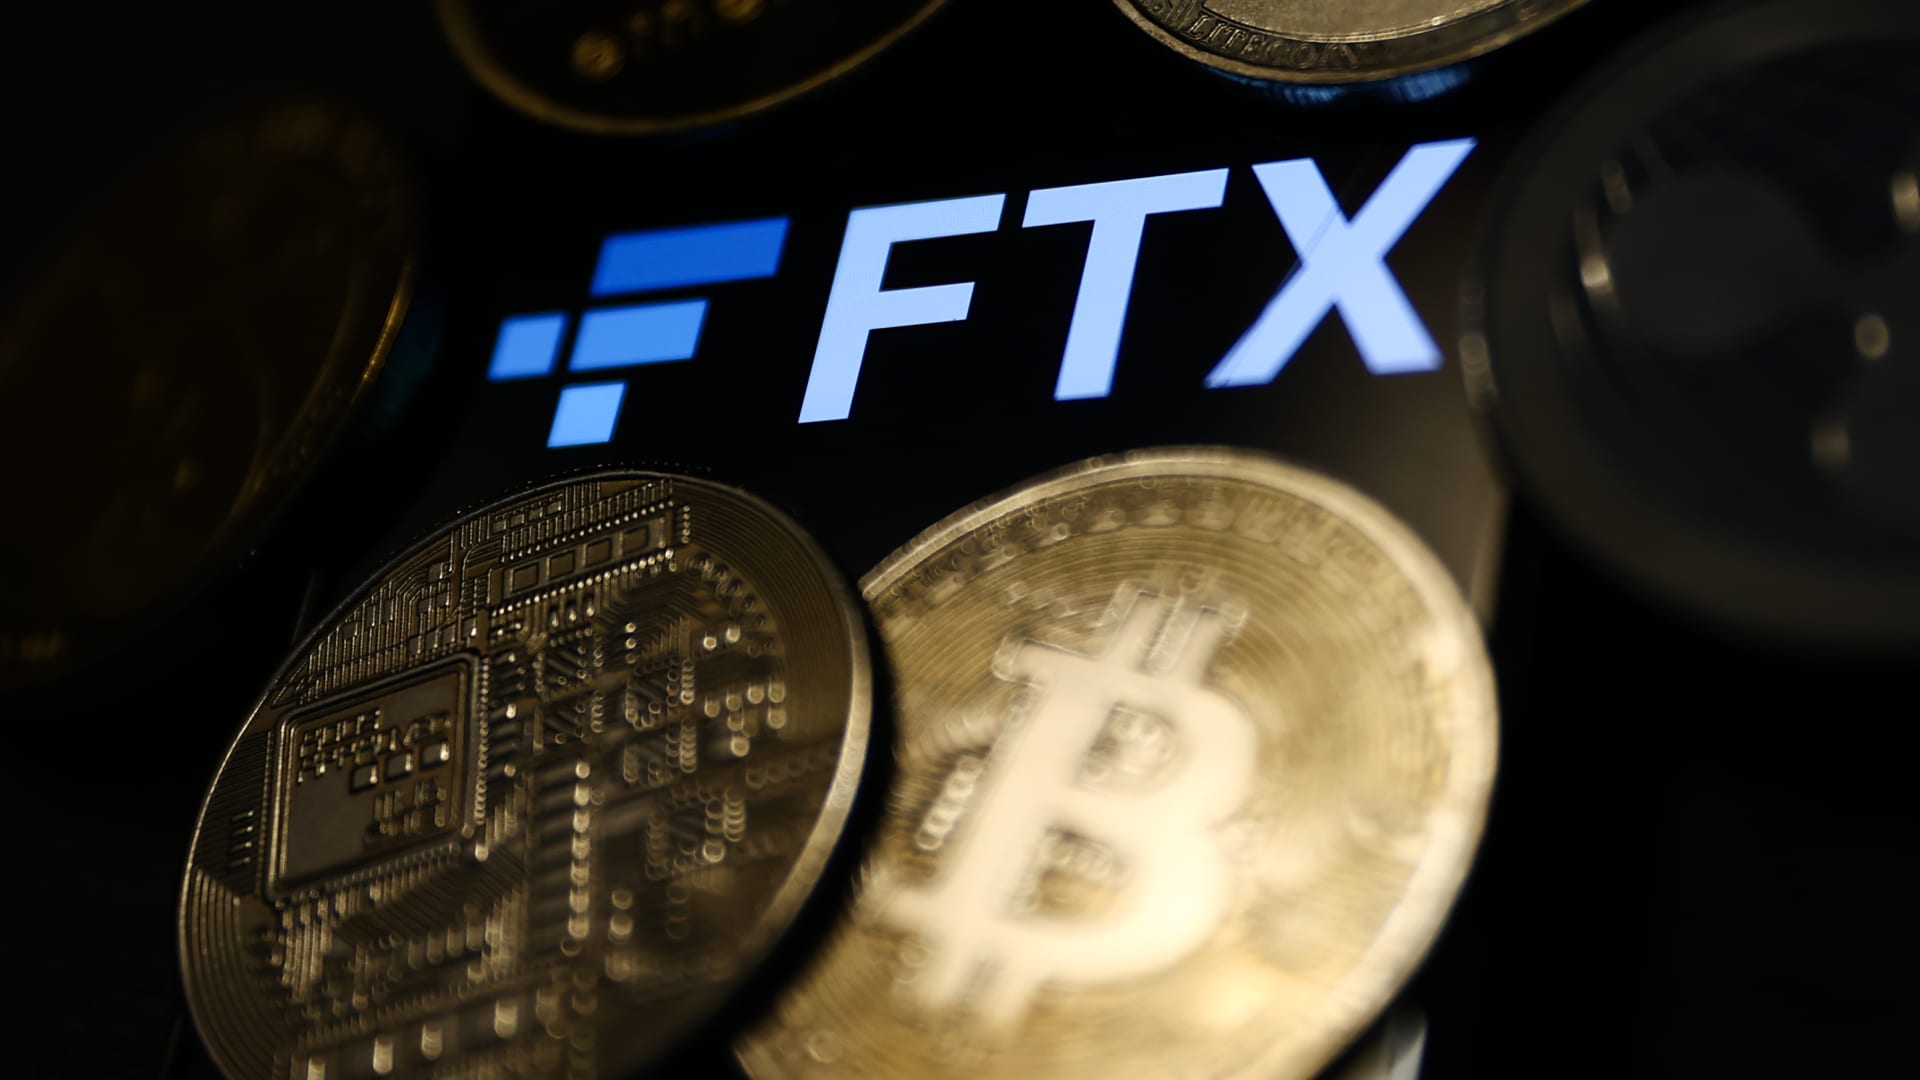 Bitcoin drops to 1-week low, ether slides 7% as FTX collapse ripples through crypto market - CNBC